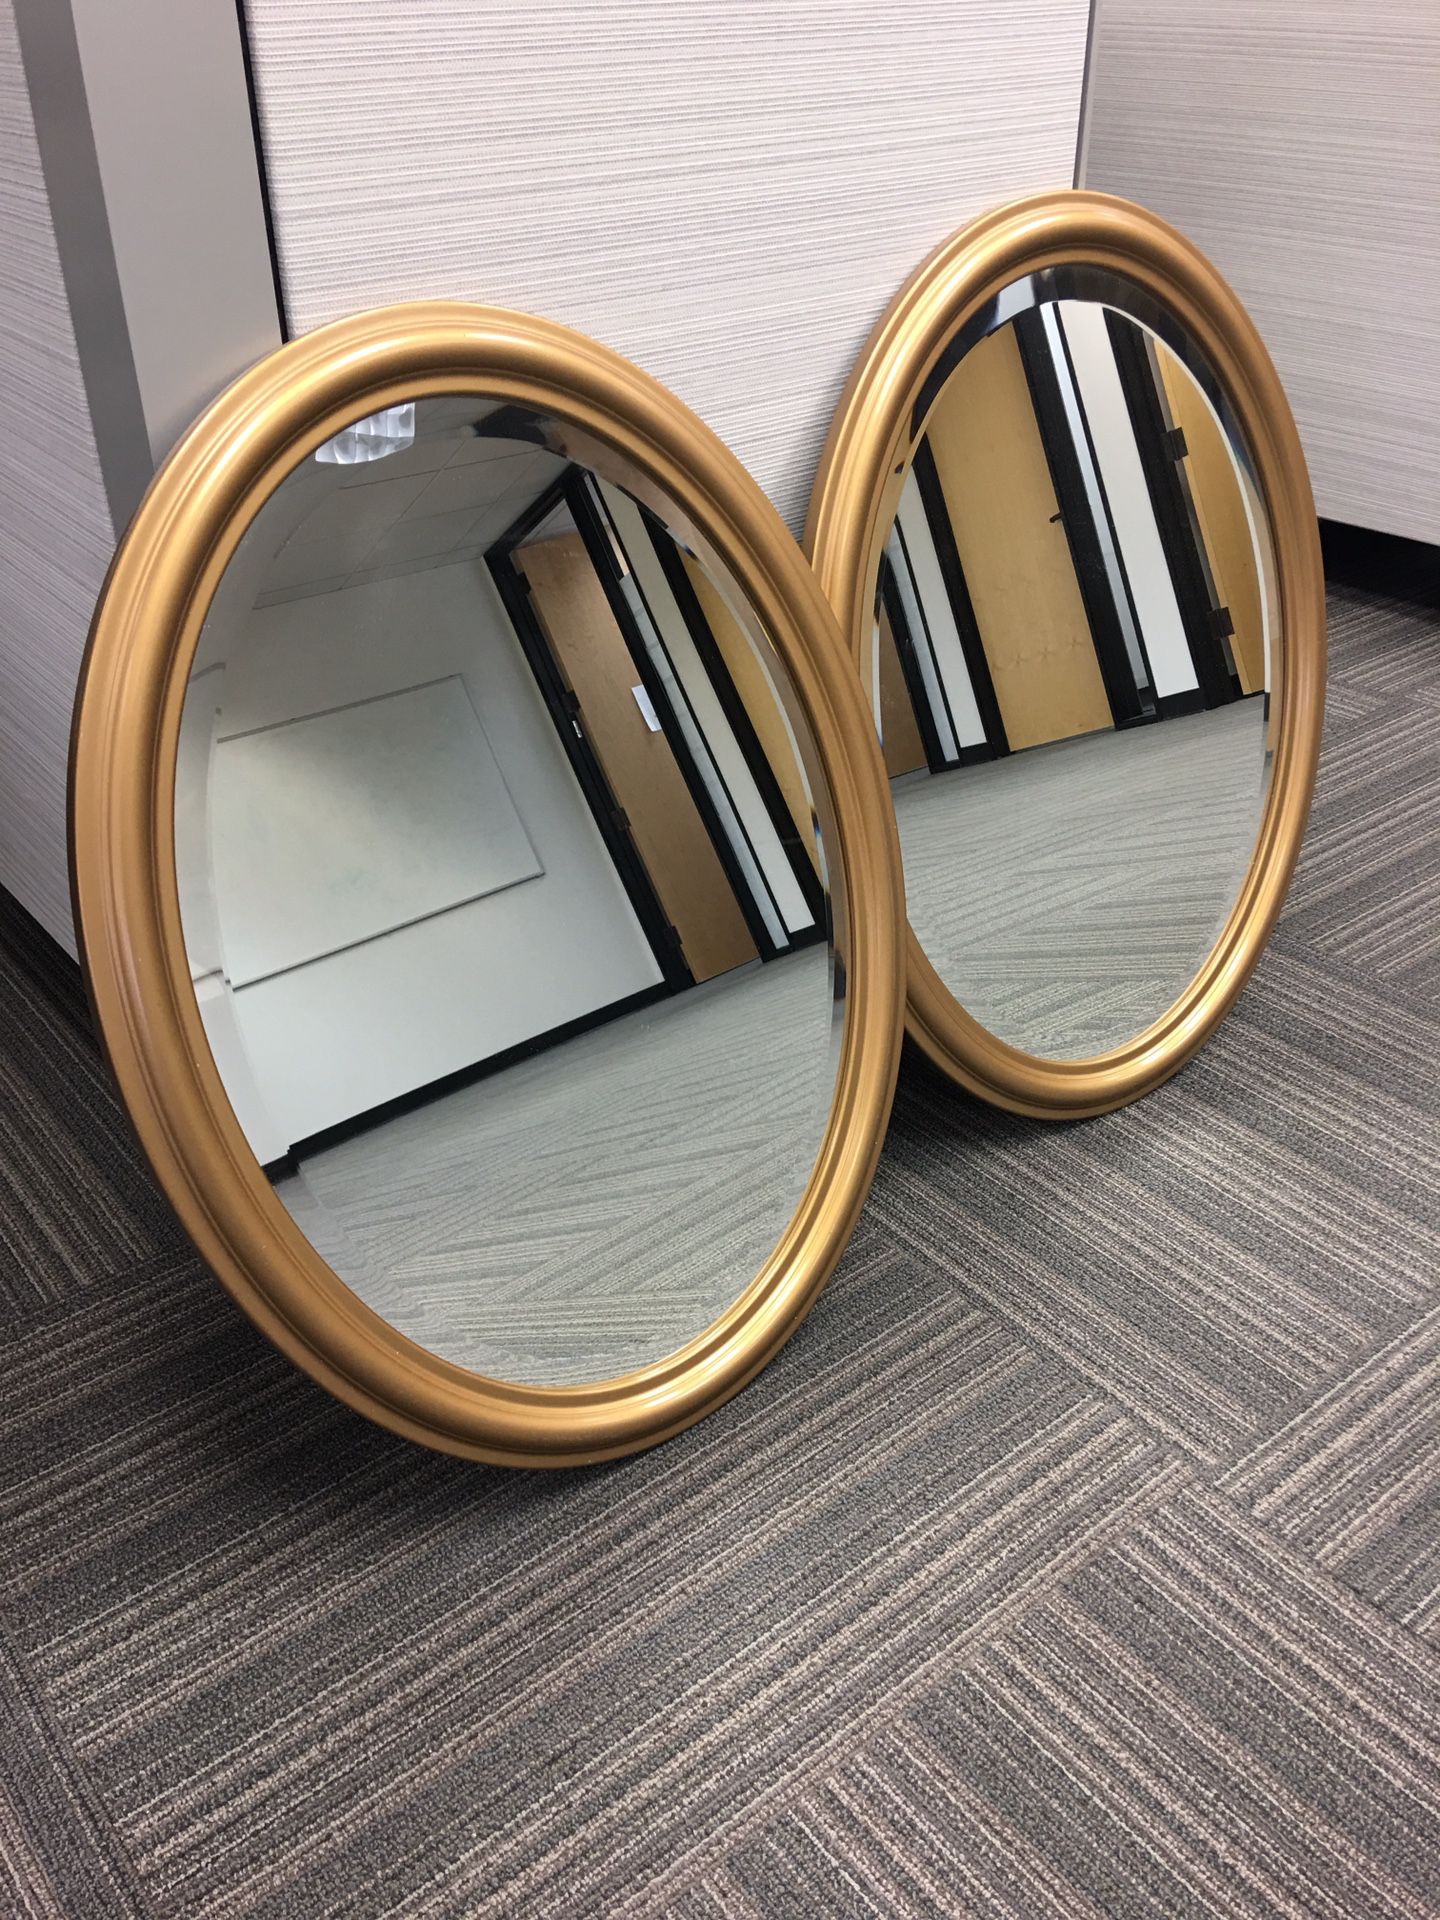 2 NICE GOLD FRAMED MIRRORS